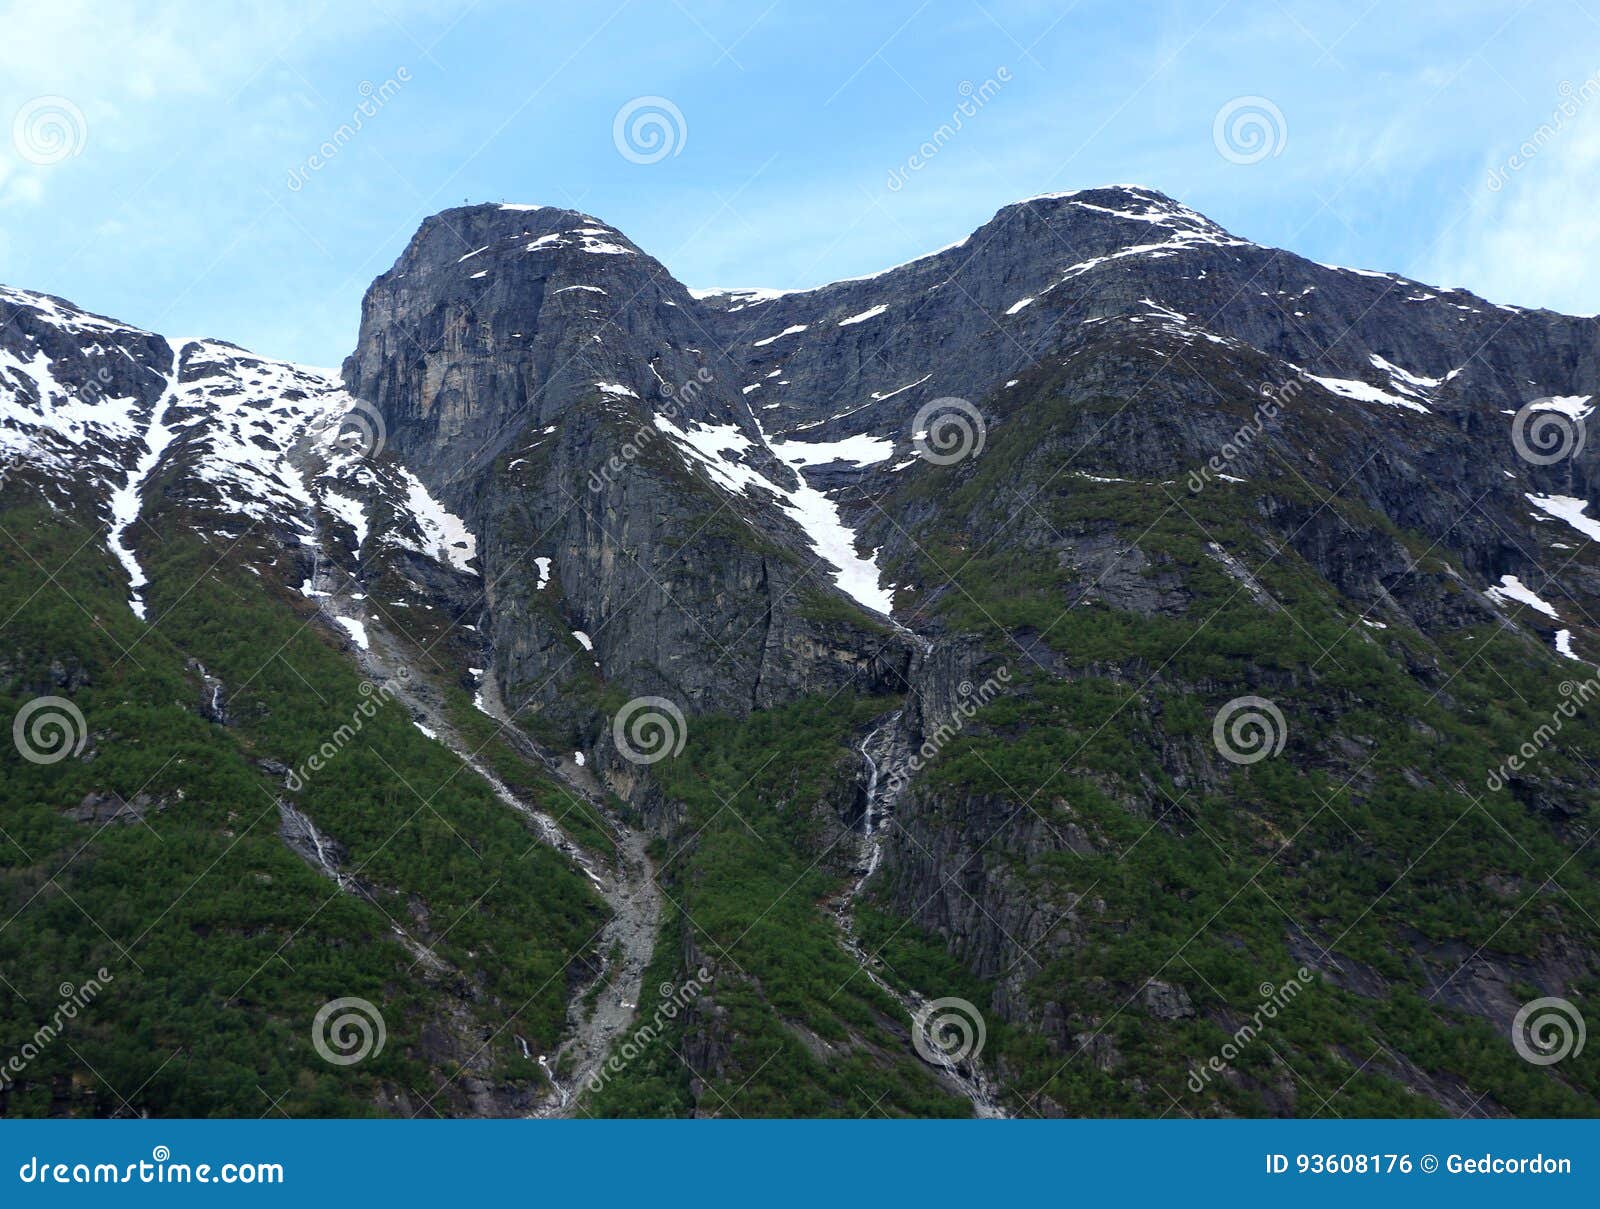 melting snow in norways fiords